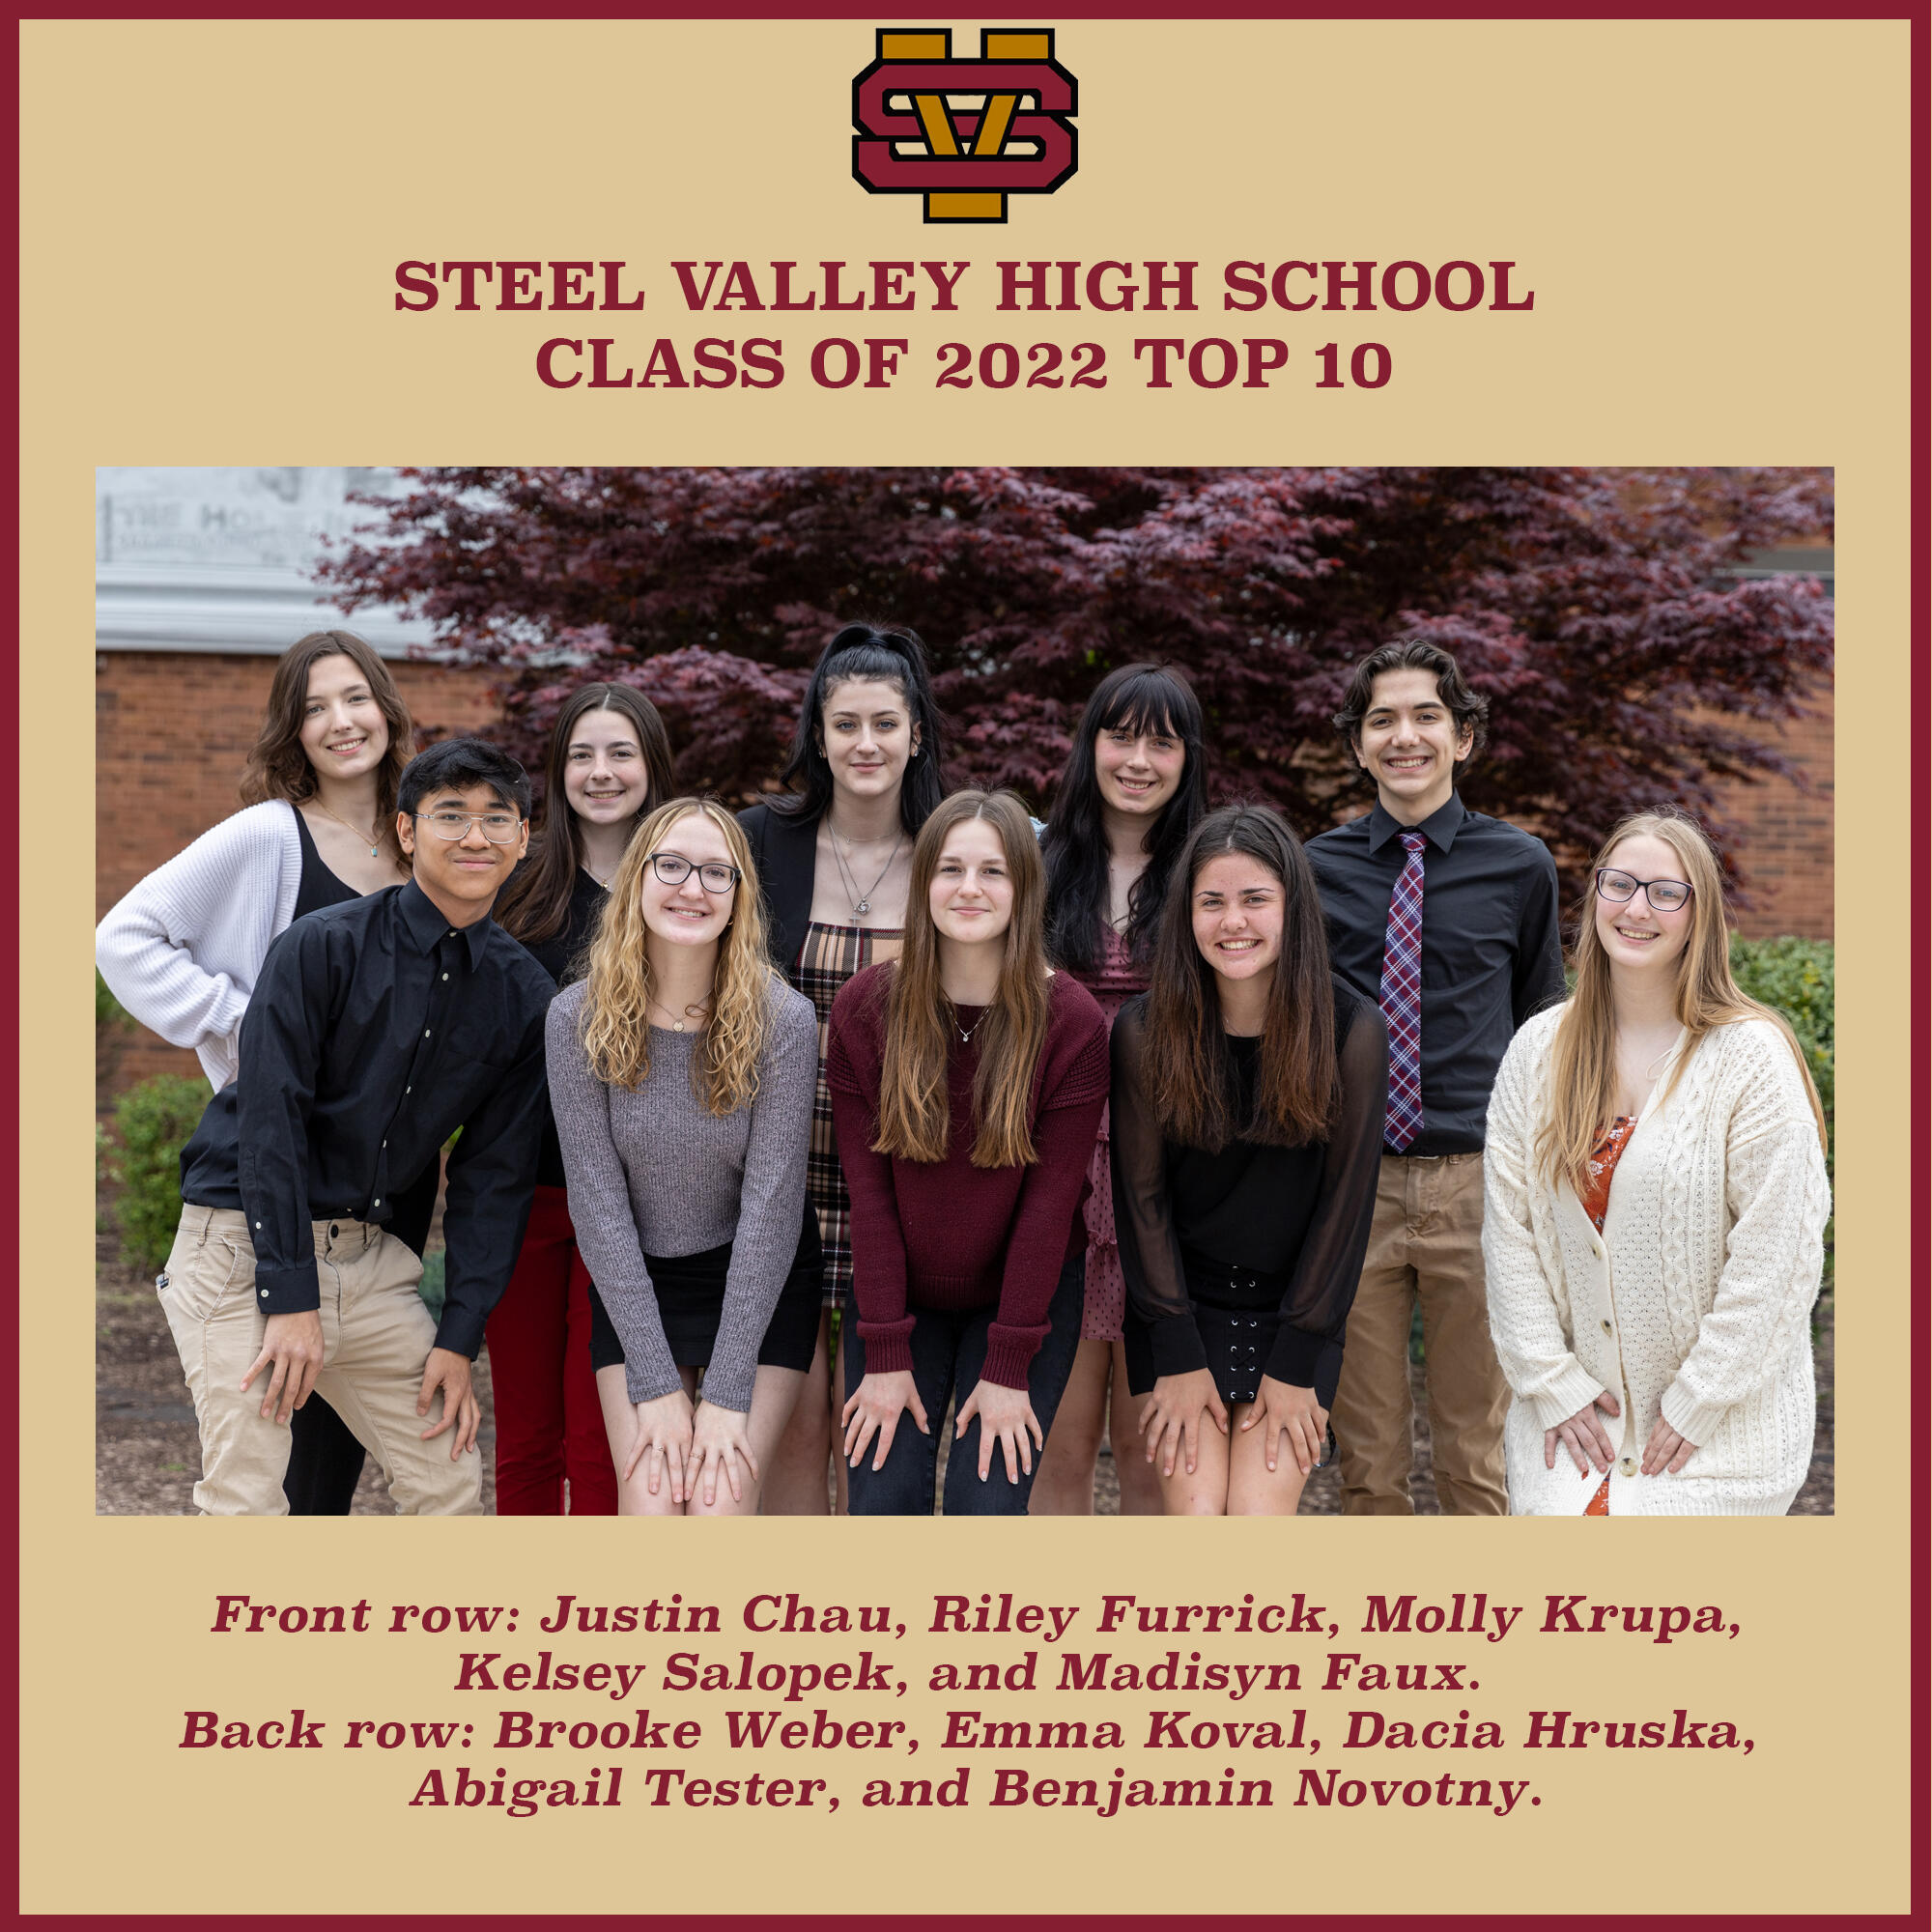 A graphic showcasing the Steel Valley Top 10 for the Class of 2022. The students pictured are Abigail Tester, Brooke Weber, Emma Koval, Dacia Hruska, Madisyn Faux, Kelsey Salopek, Justin Chau, Molly Krupa, salutatorian Riley Furrick, and valedictorian Benjamin Novotny.